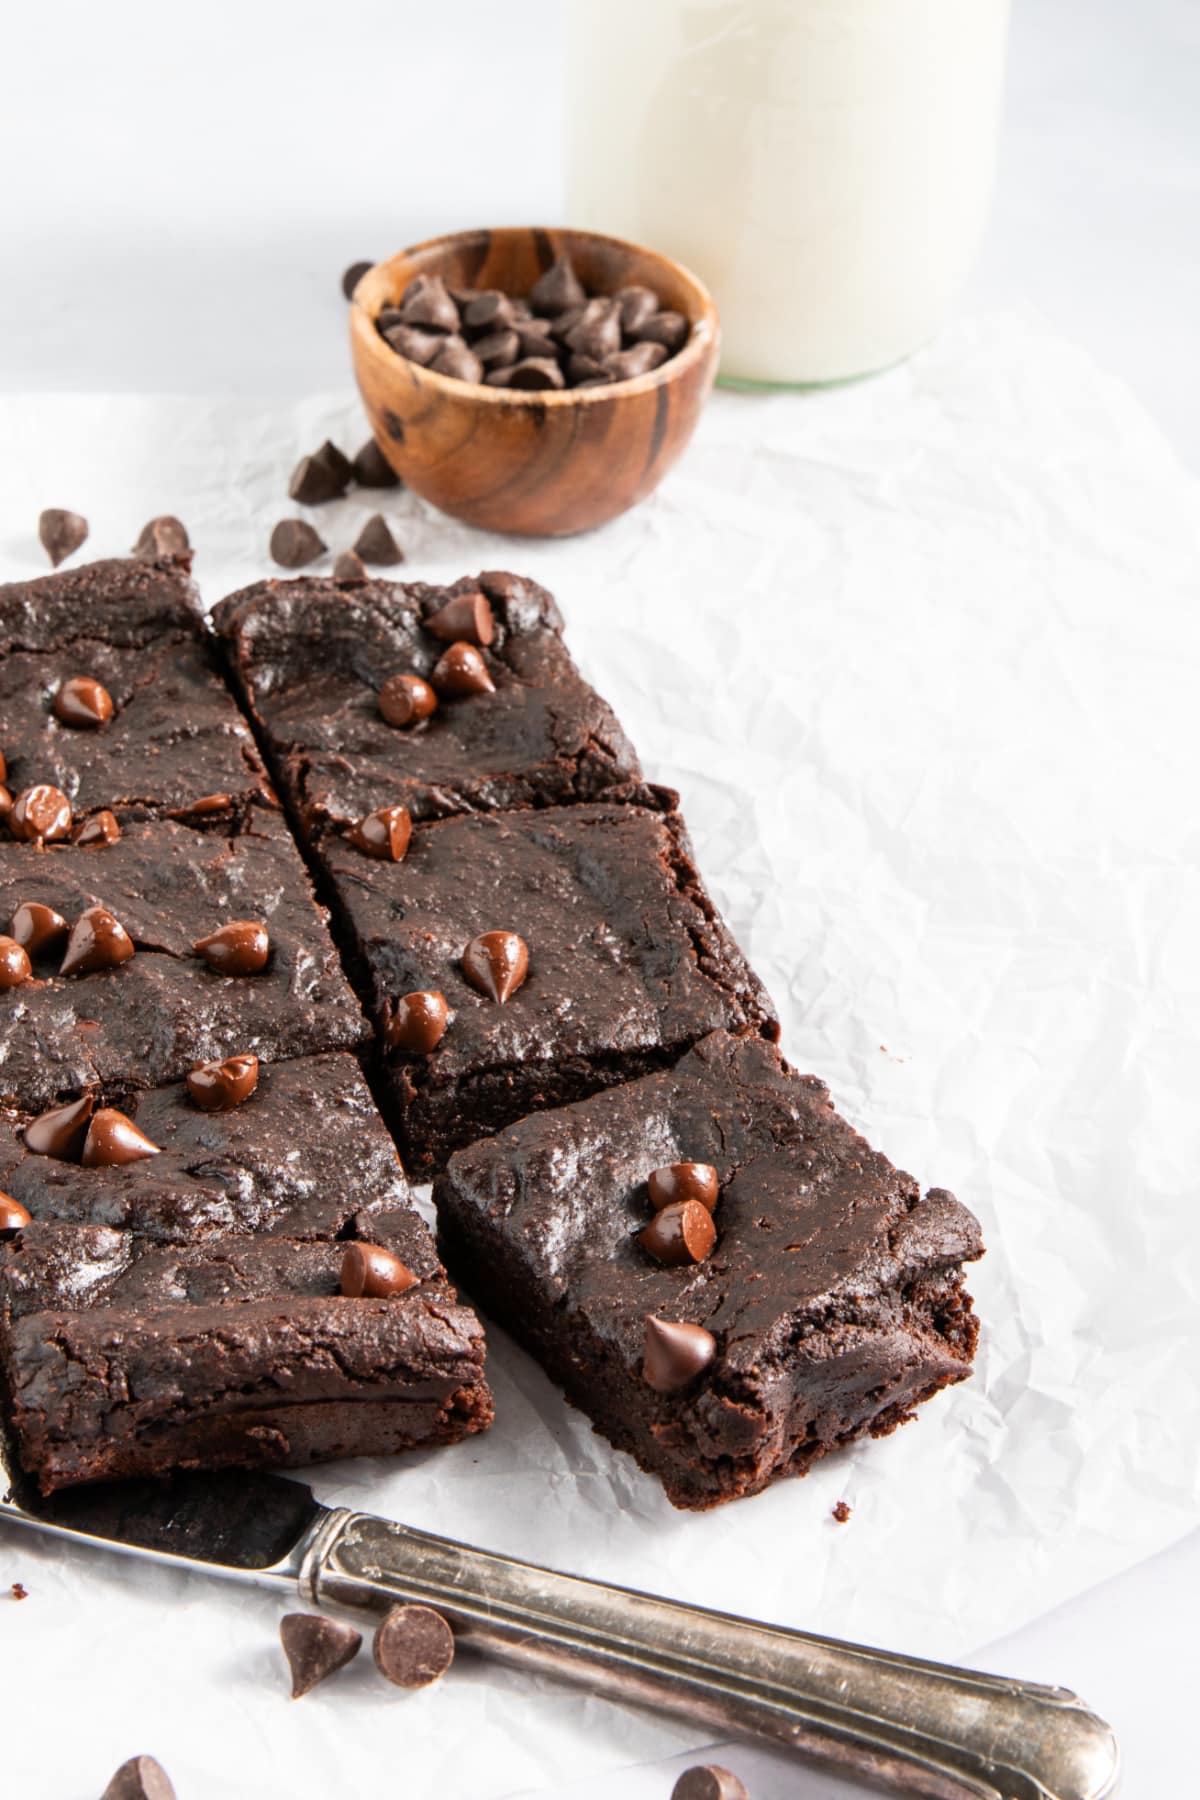 Six black bean brownies with chocolate chips cut into squares and sitting on a white surface next to a silver butter knife. A small bowl of chocolate chips in background, chocolate chips scattered around.